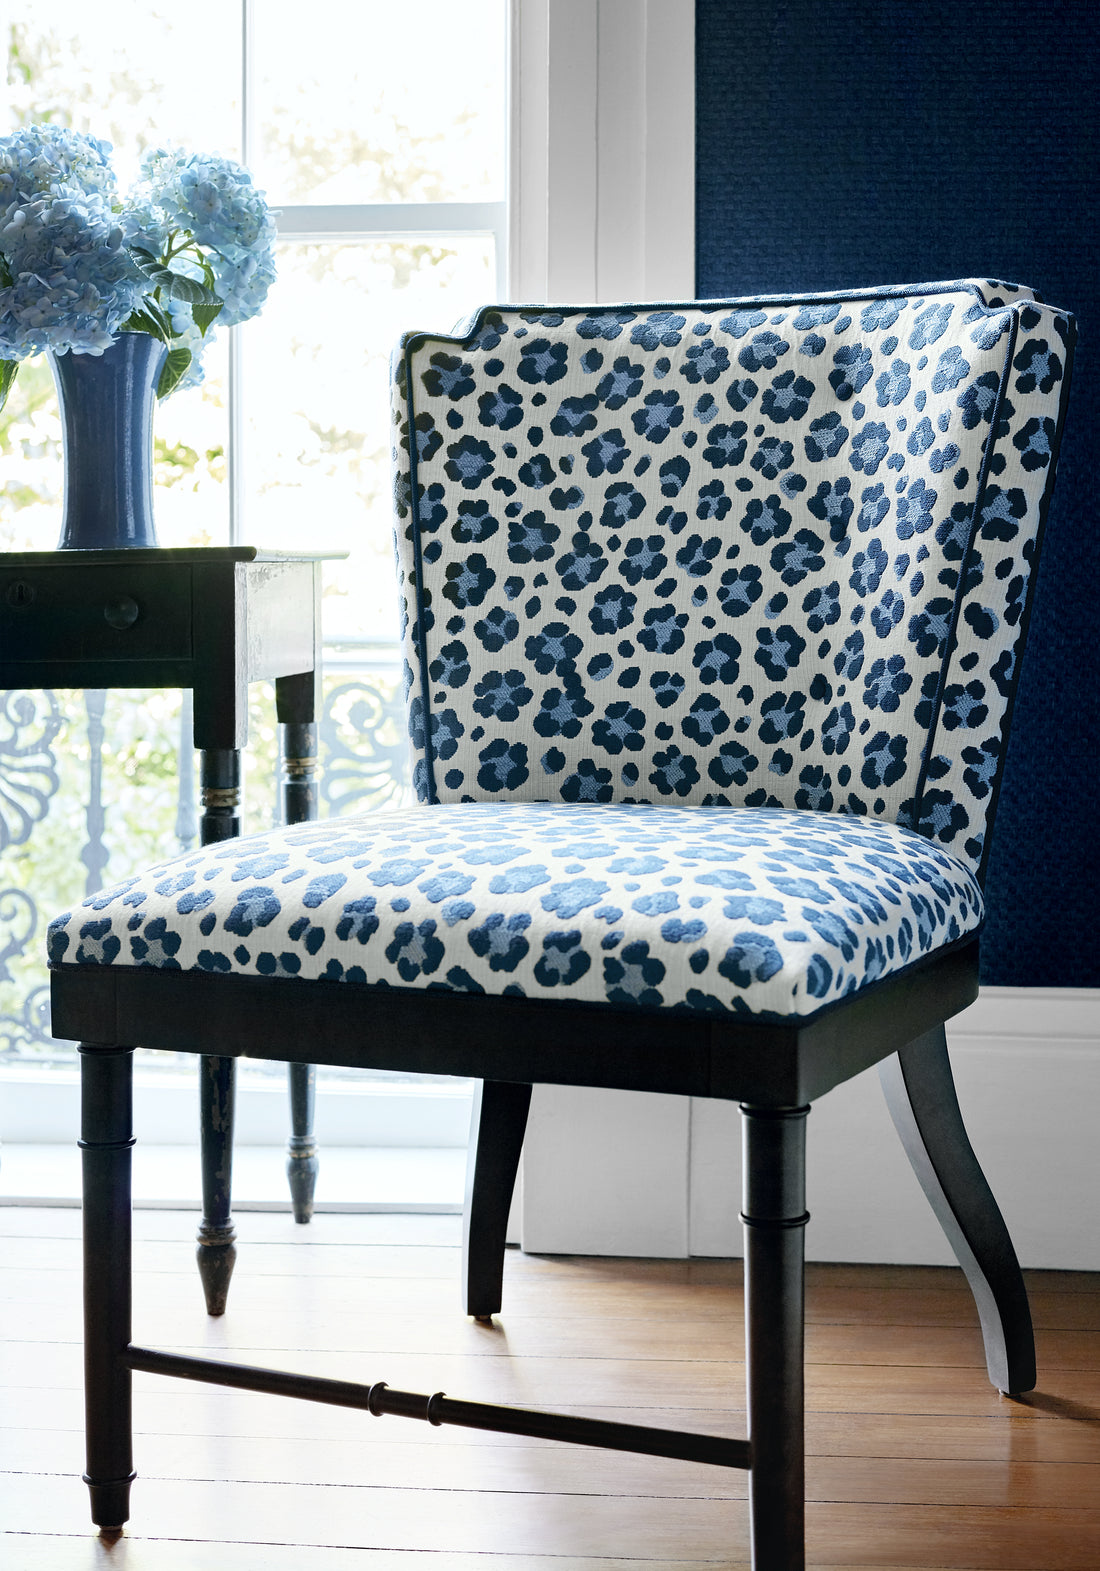 Stirling Chair in Trixie woven fabric in navy and sky color - pattern number W80419 - by Thibaut in the Woven Resource Vol 10 Menagerie collection